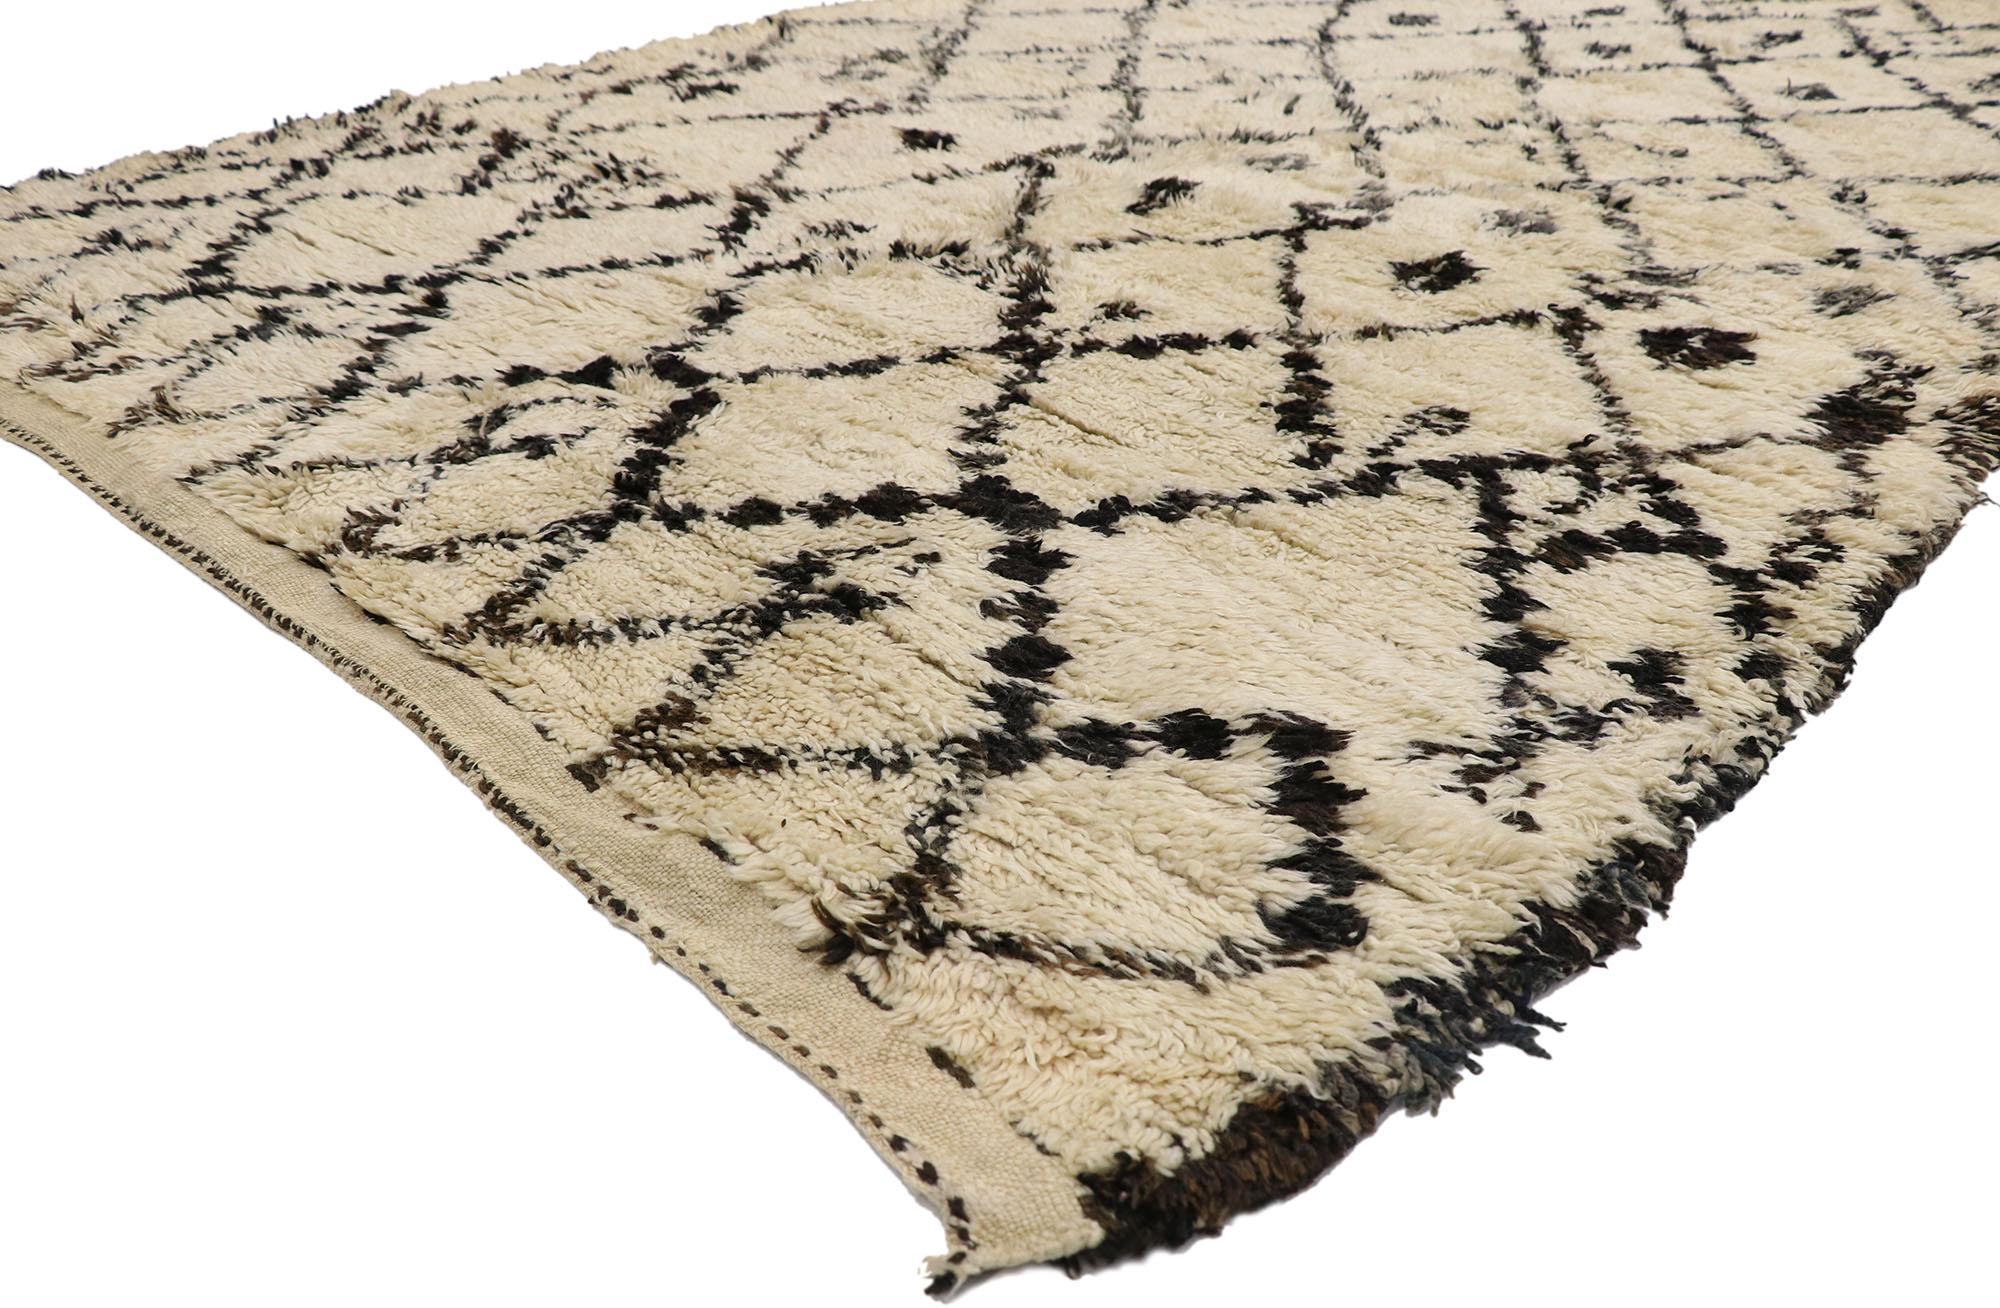 21409 Vintage Berber Beni Ourain Moroccan rug with Tribal Style 06'05 x 10'02. With its simplicity, plush pile and tribal style, this hand knotted wool vintage Berber Beni Ourain Moroccan rug is a captivating vision of woven beauty. It features a